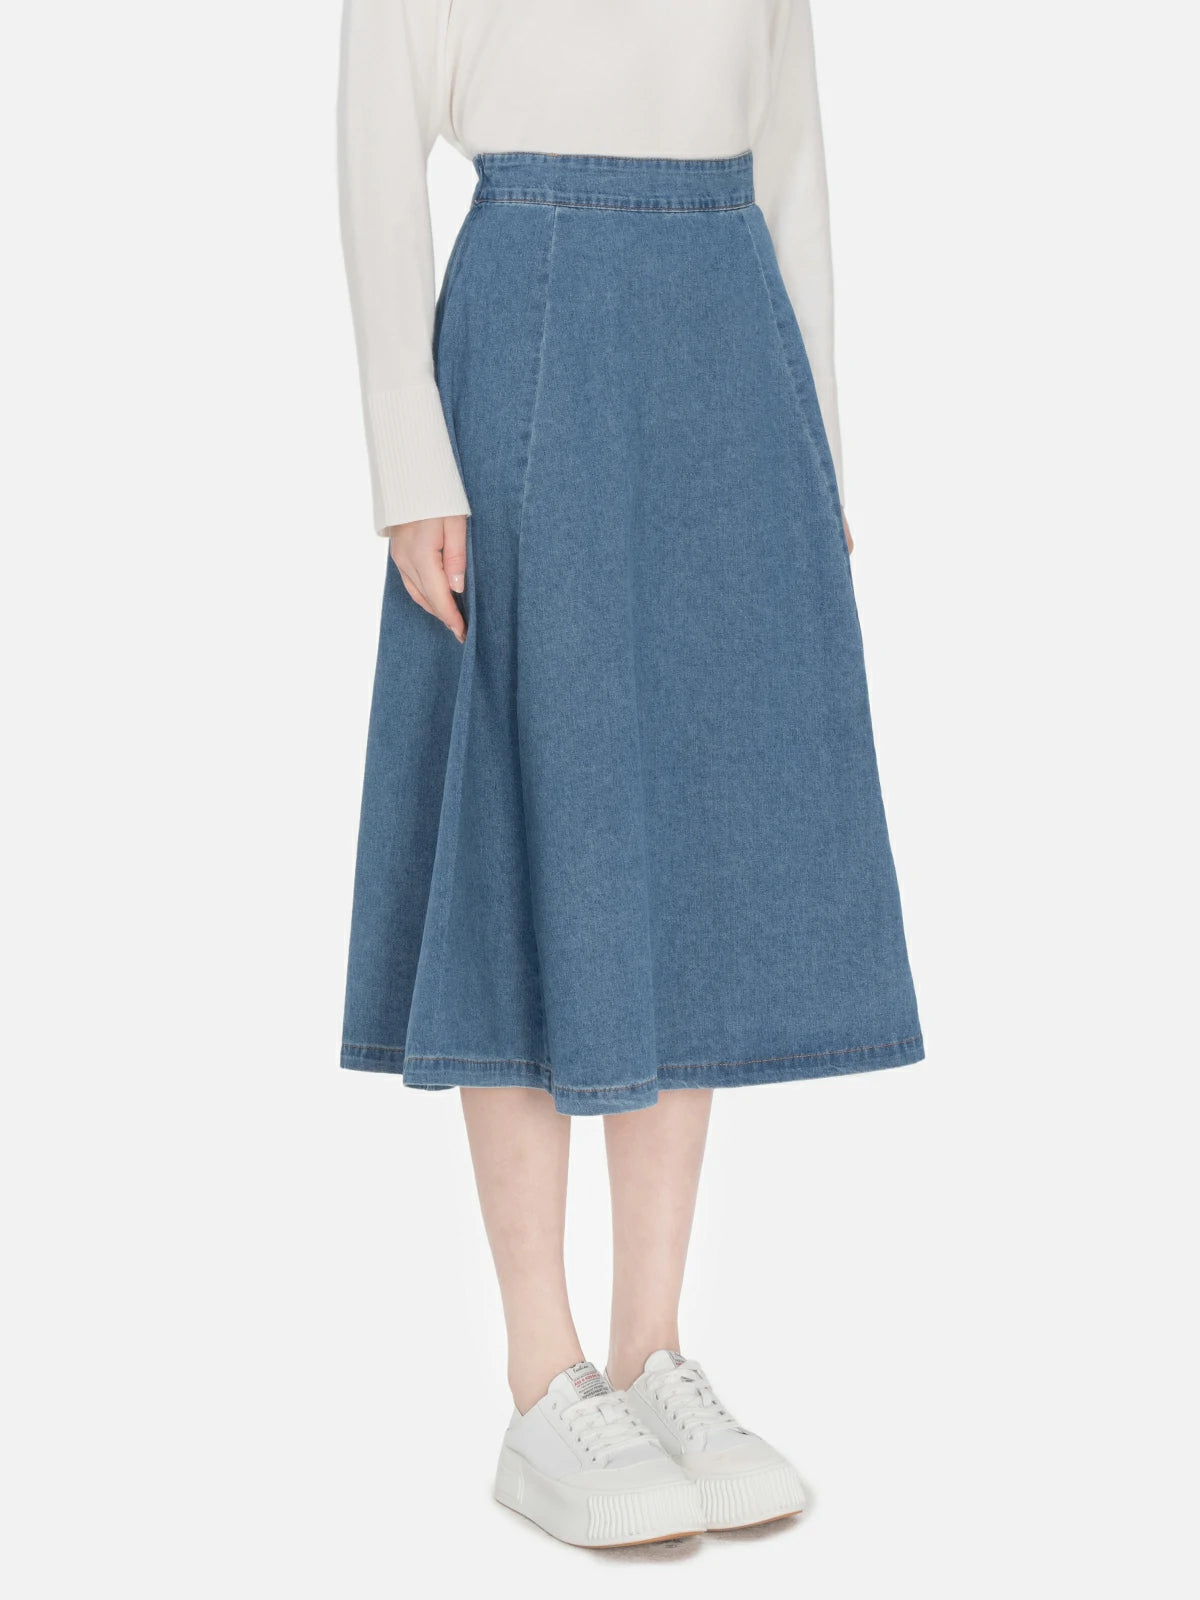 Versatile blue denim skirt featuring a classic A-line cut, and high waist, providing a comfortable and durable option suitable for various occasions.